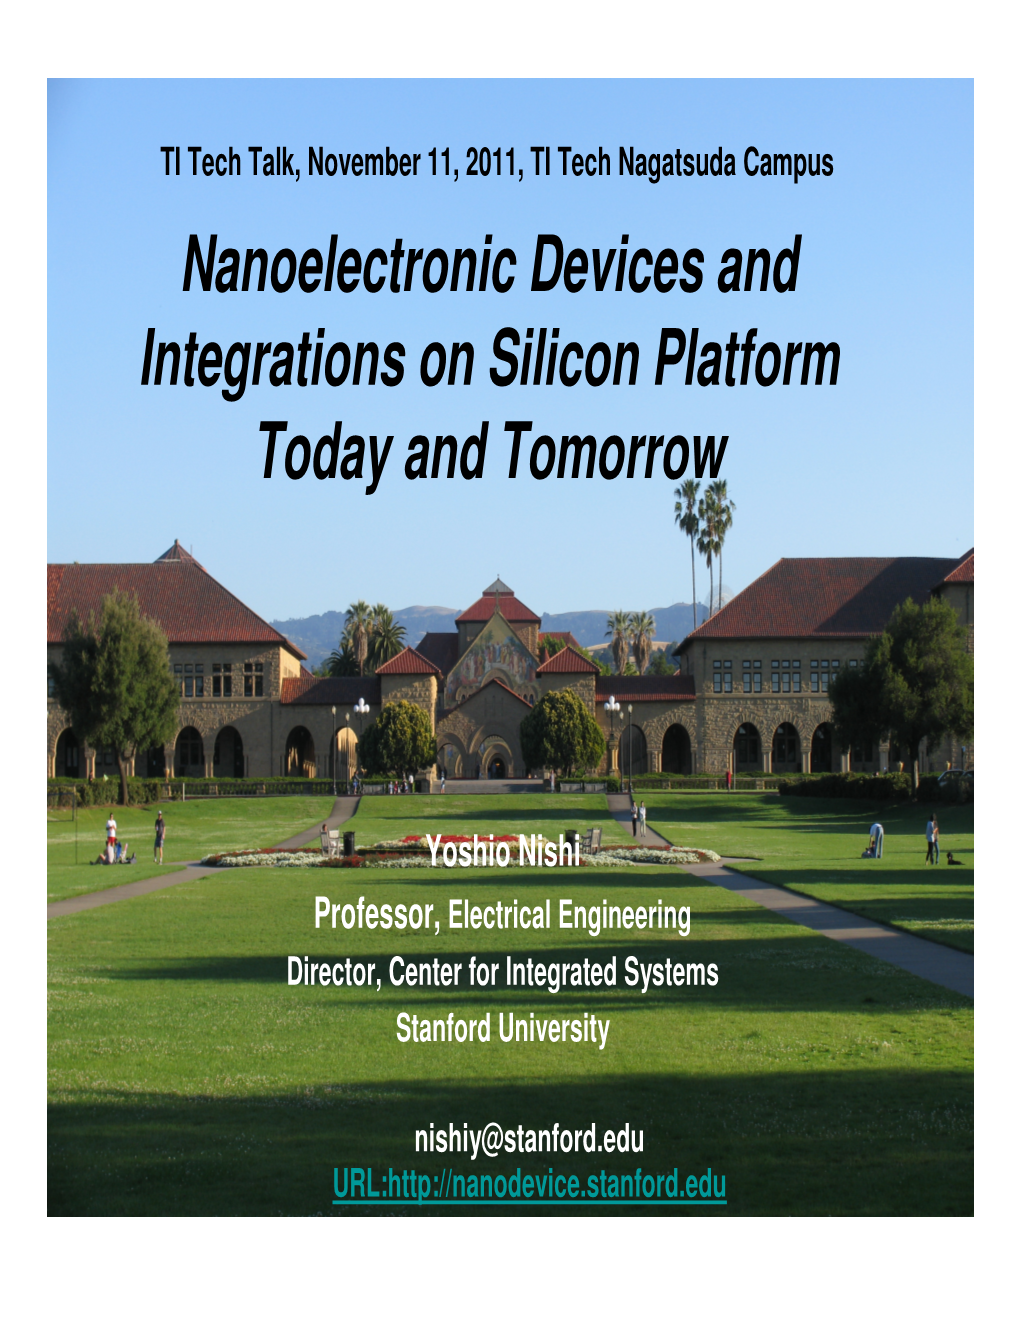 Nanoelectronic Devices and Integrations on Silicon Platform Today and Tomorrow